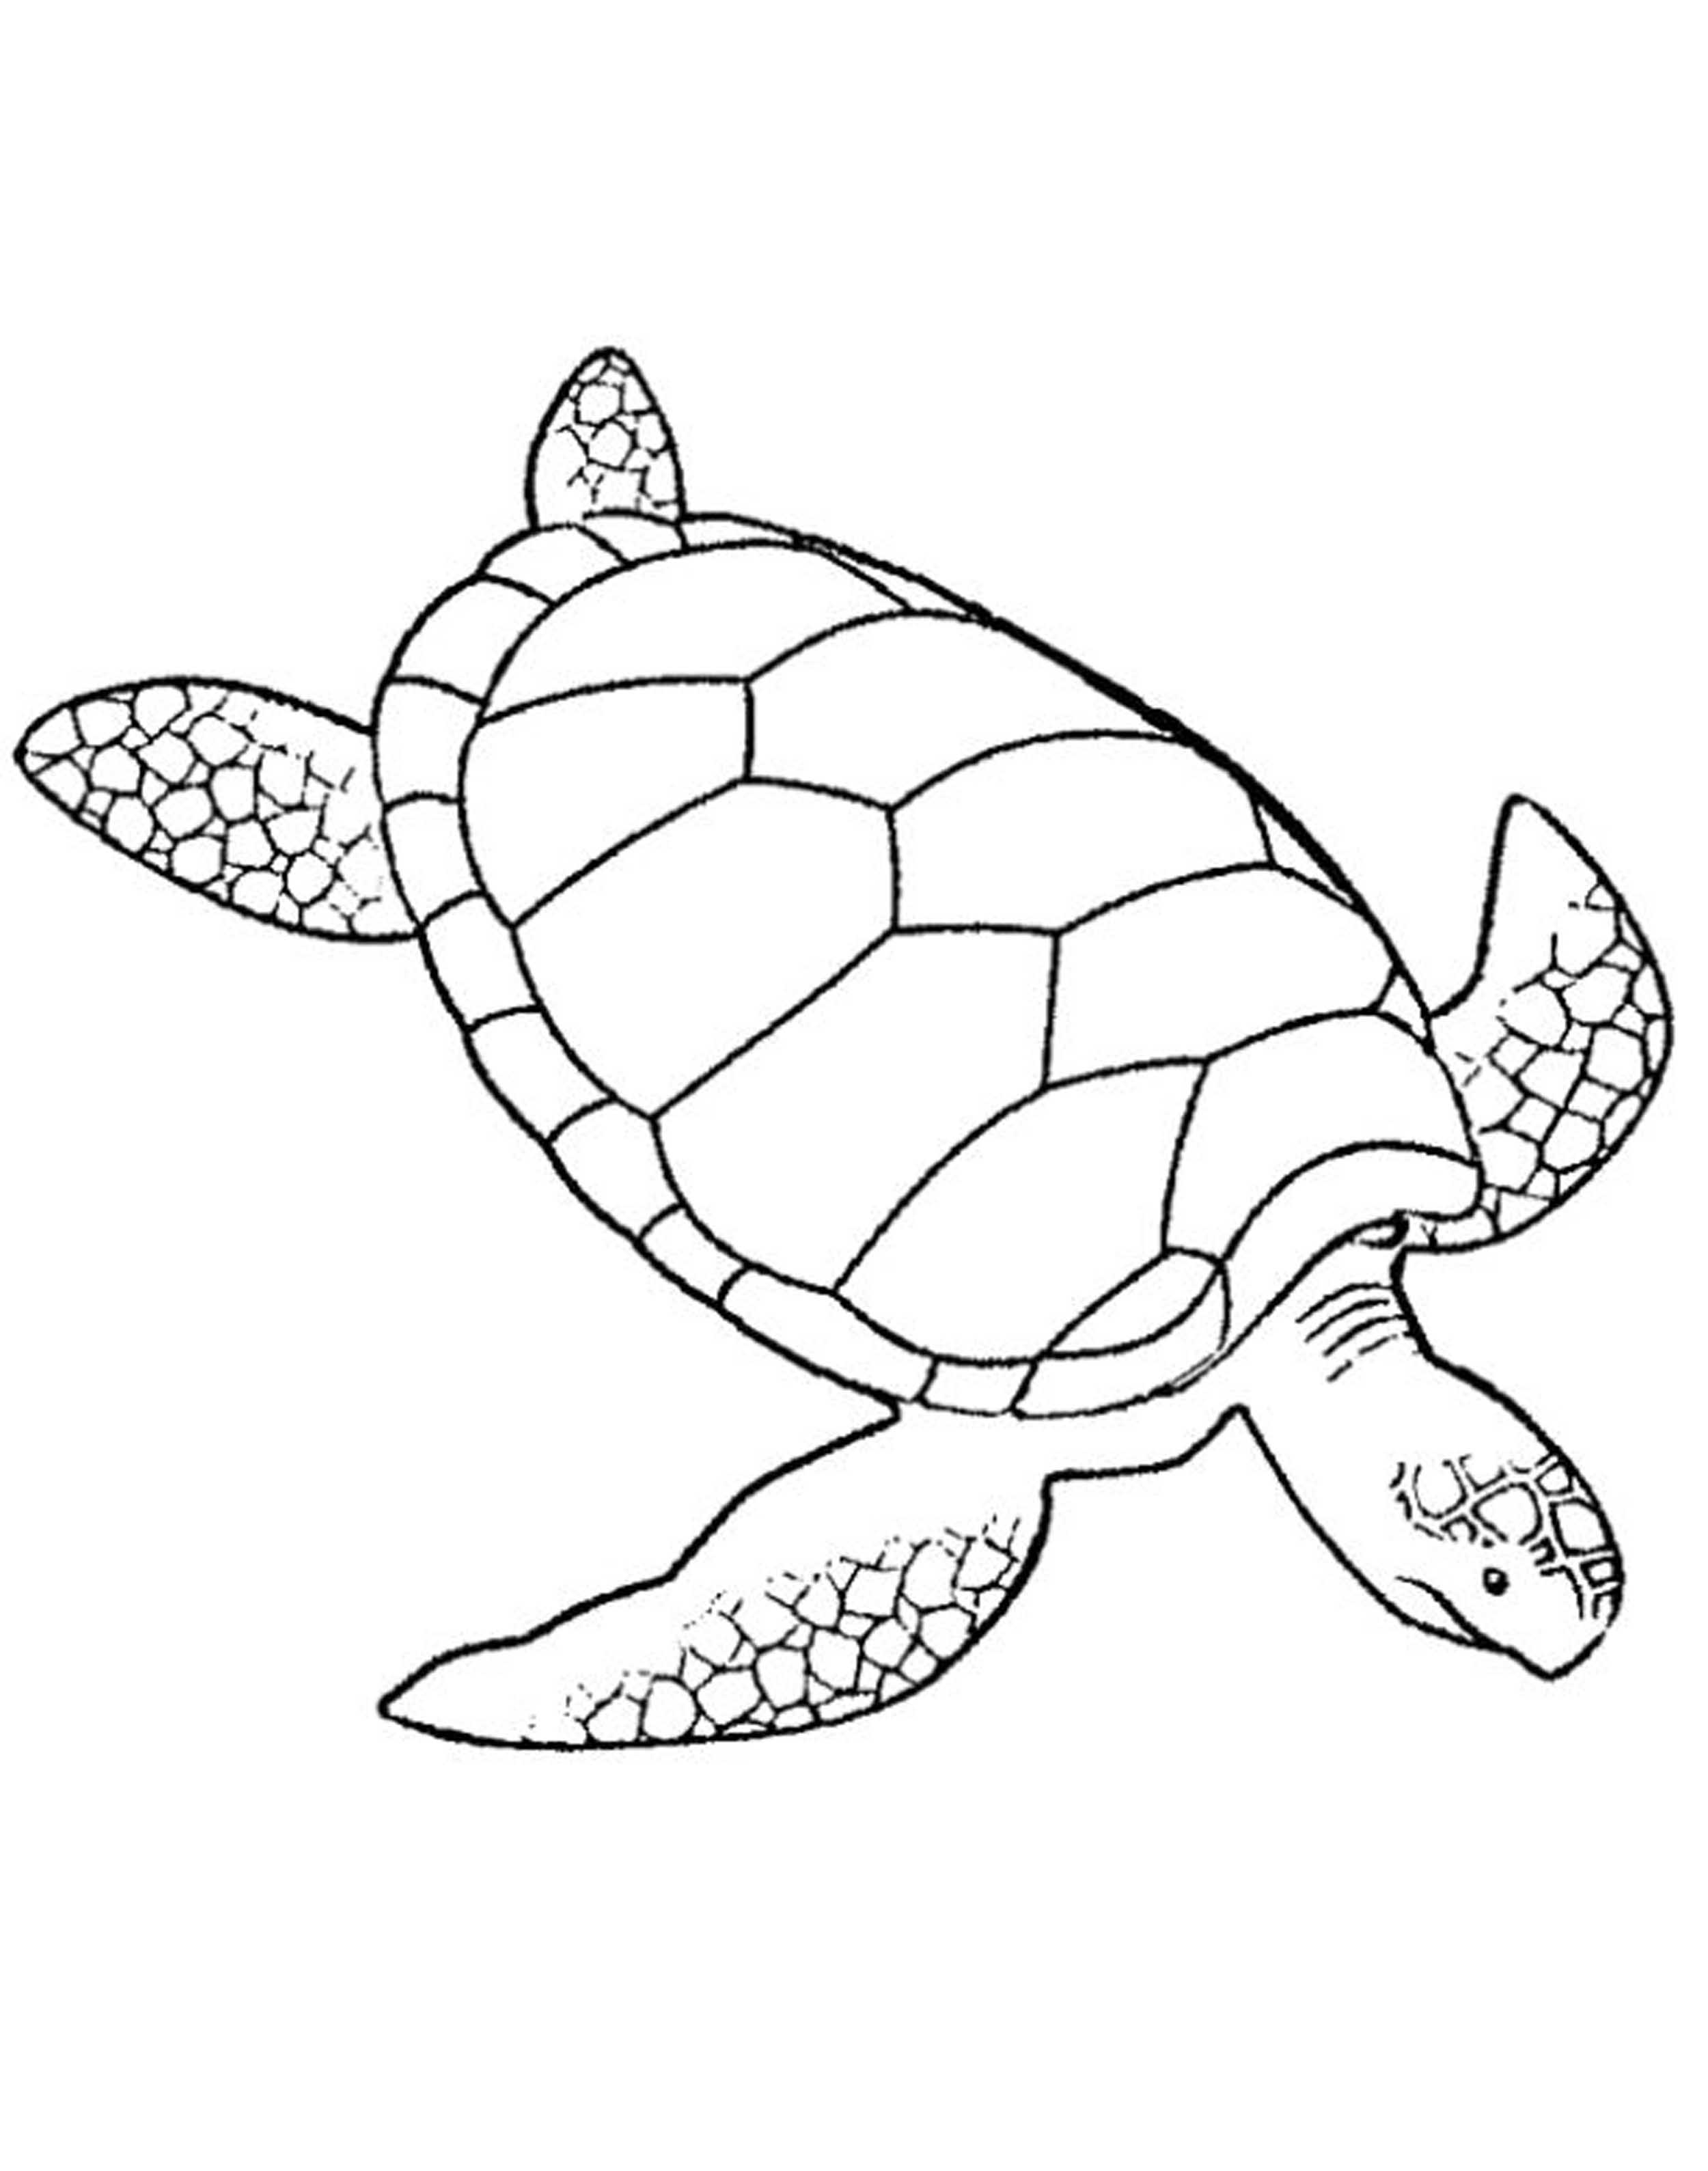 Print Download Turtle Coloring Pages as the